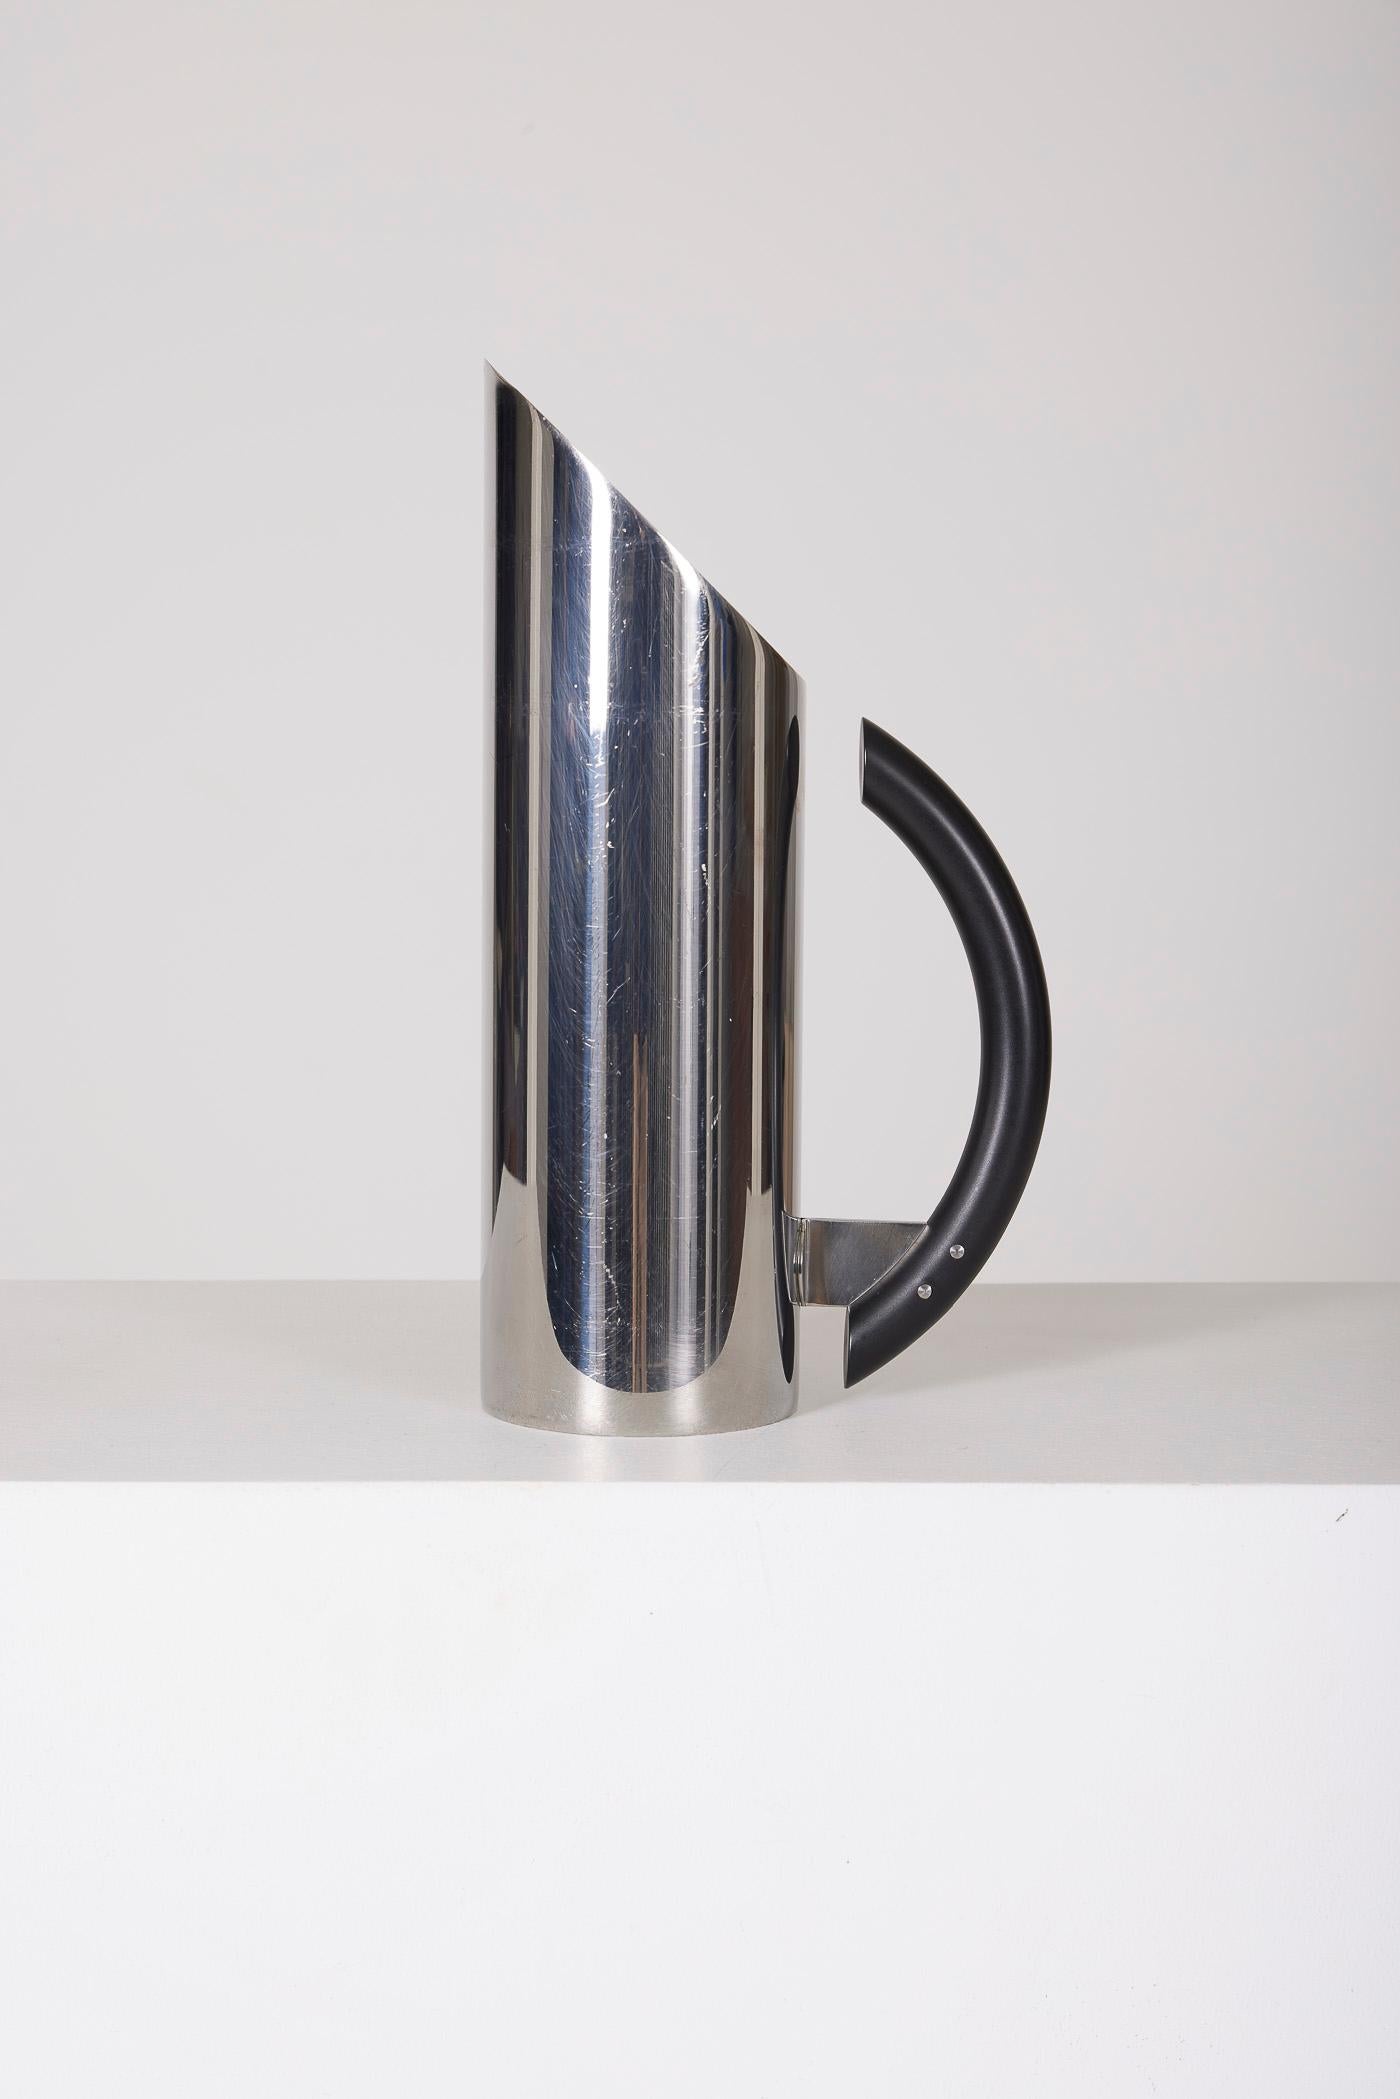 Mia pitcher by Italian designer Mario Botta for Alessi, from the 1990s. This pitcher is made of stainless steel with a blackened wood handle. In very good condition.
LP2641